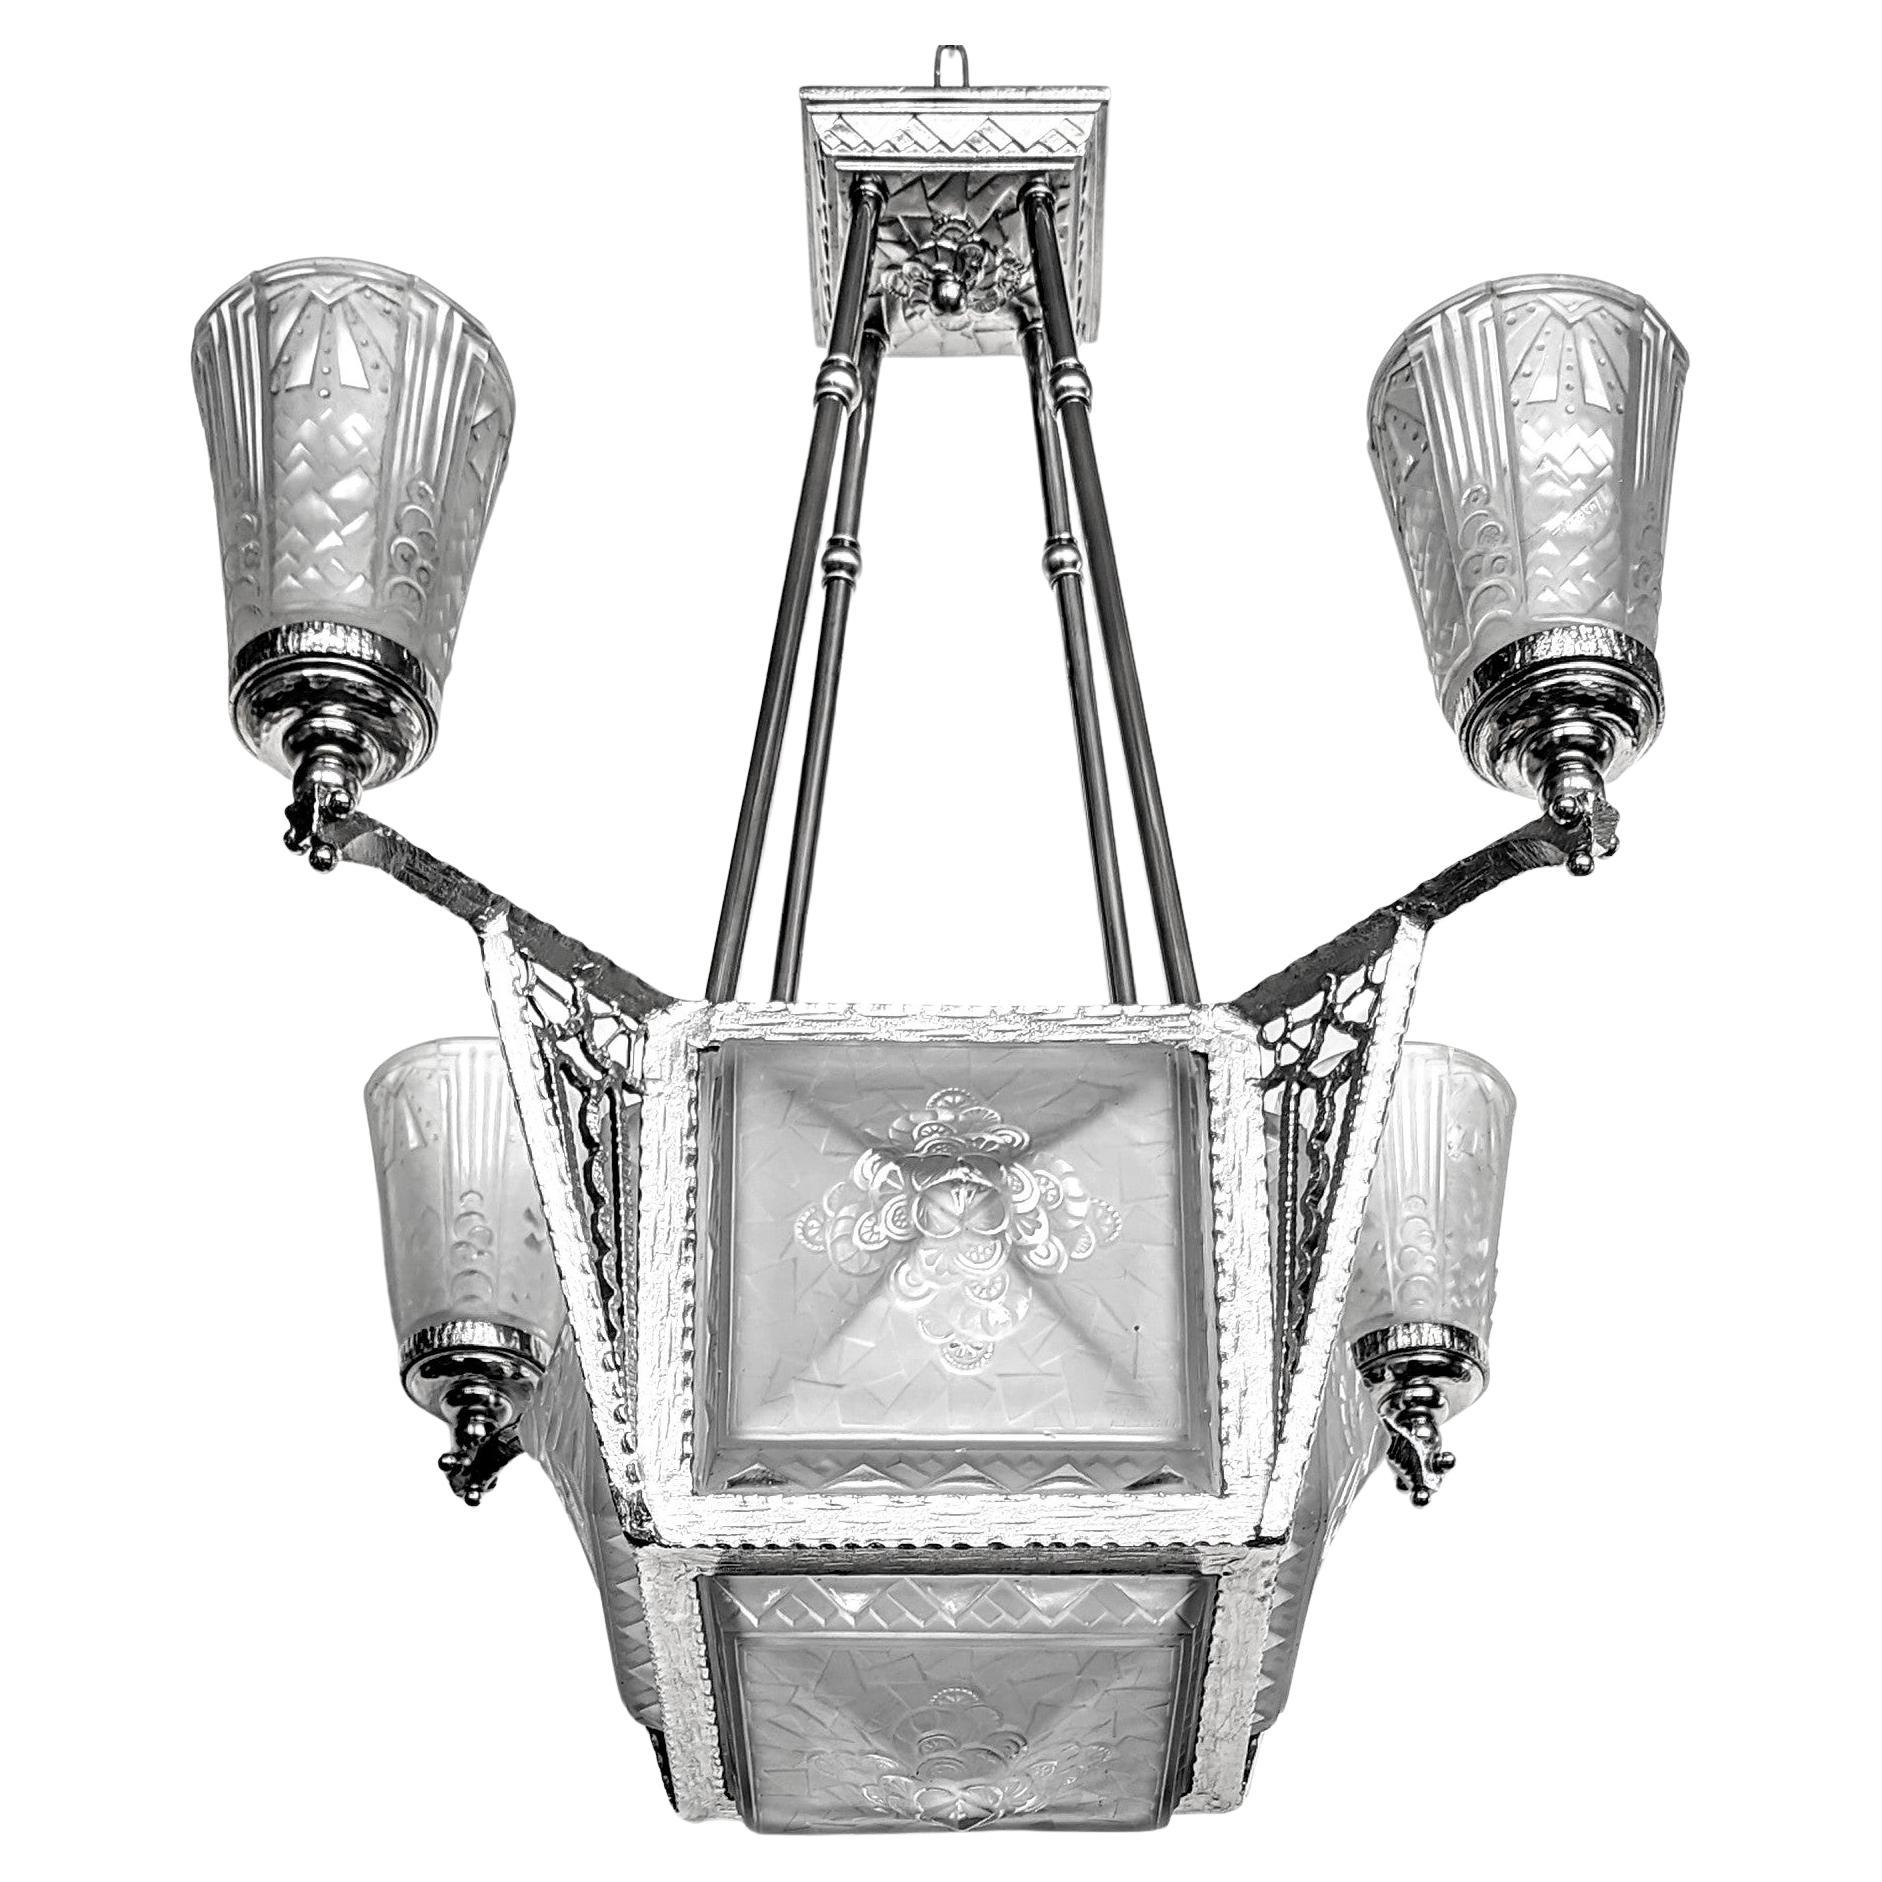 A gorgeous French Art Deco chandelier by Muller Freres in great condition. The chandelier consists of five square shades. Four on each side, and one in the bottom with 4 matching tulipes. In a clear frosted glass with geometric motifs. Mounted on a